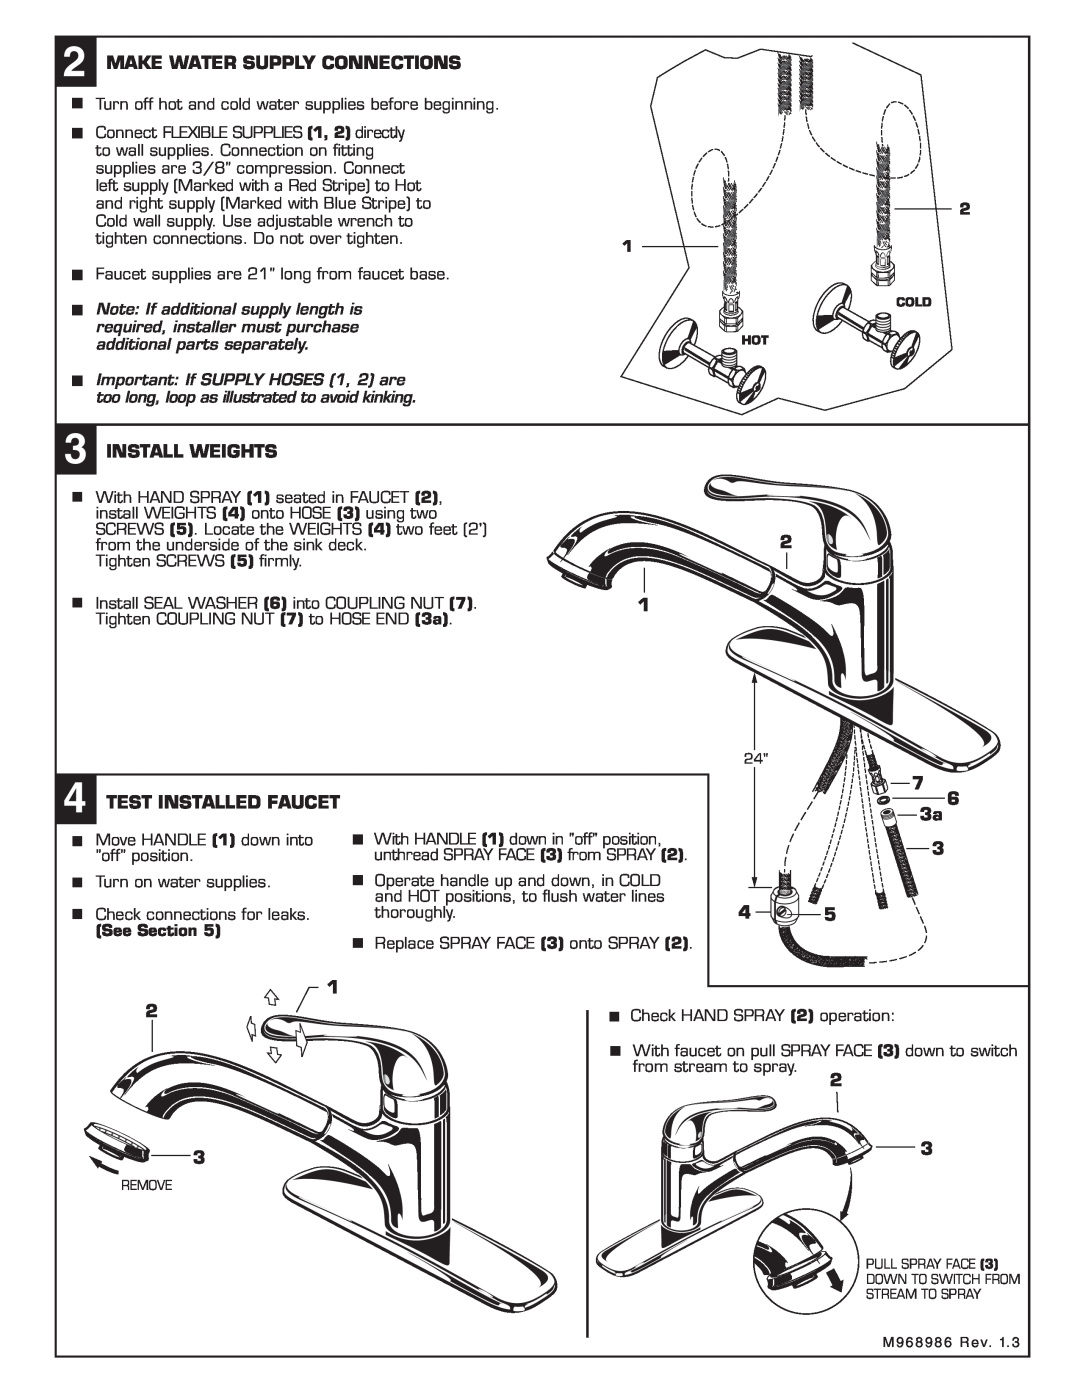 American Standard 4175.1 Make Water Supply Connections, Install Weights, Test Installed Faucet, See Section 